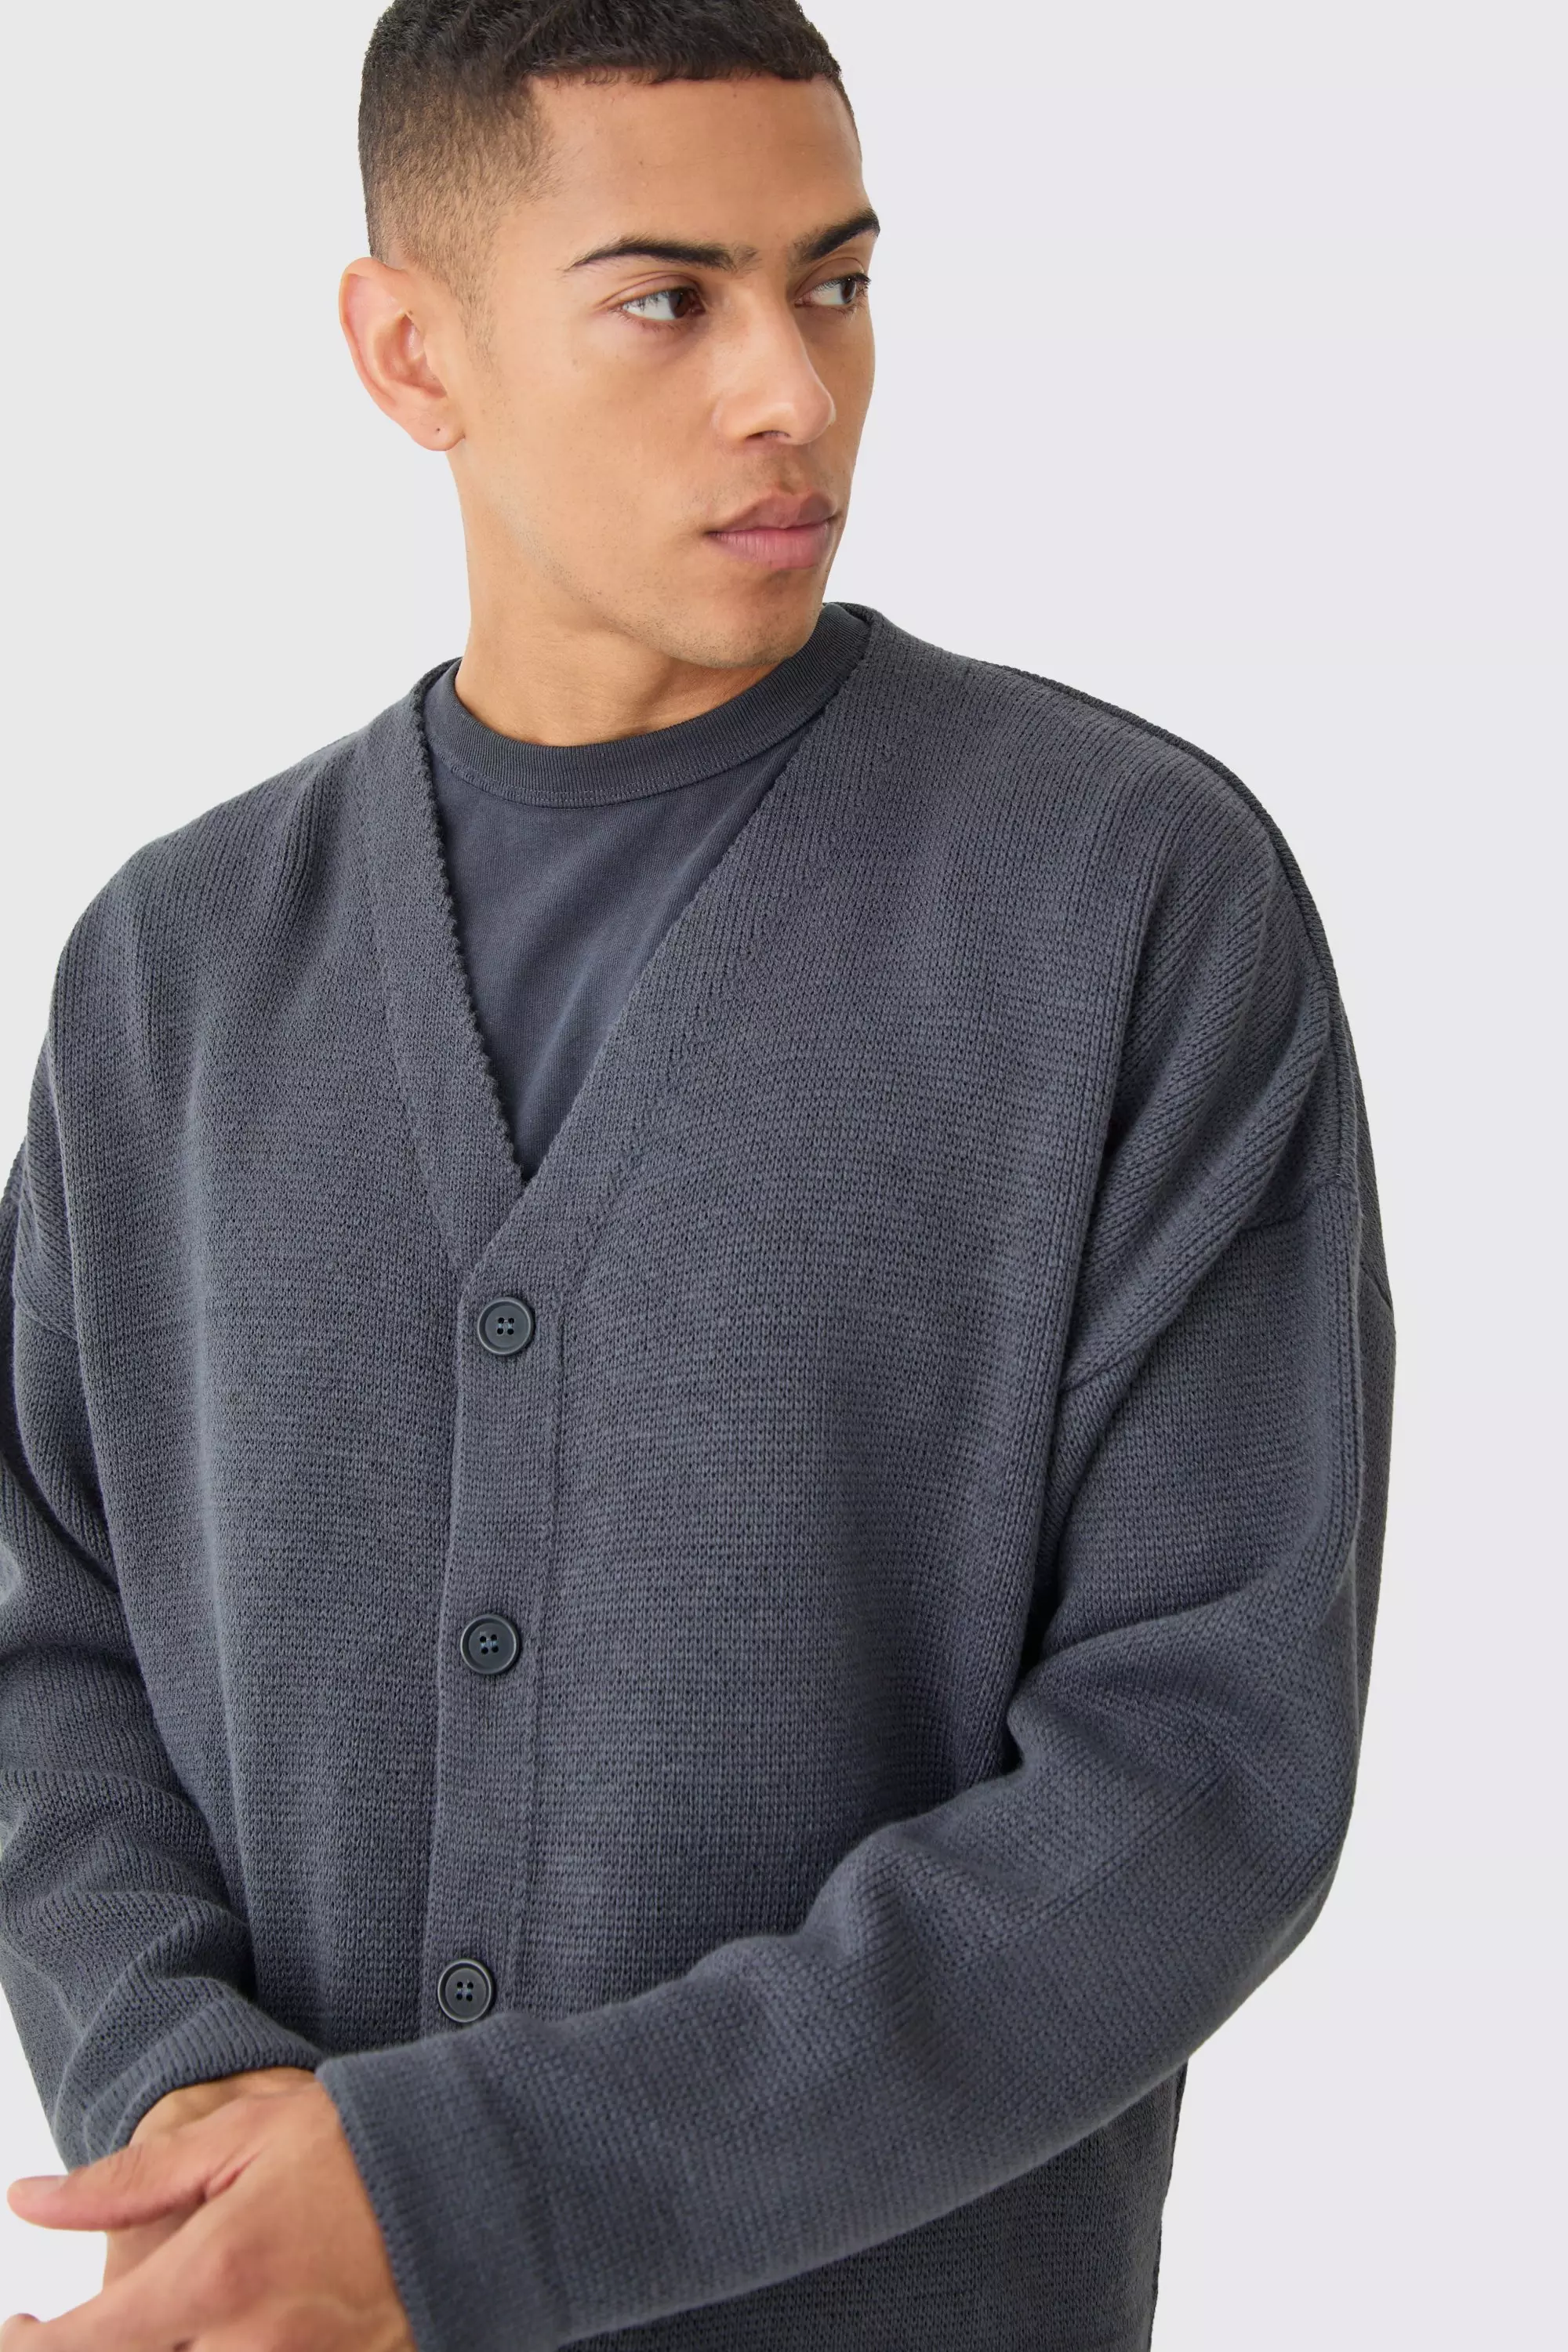 Charcoal Grey Boxy Drop Shoulder Knitted Cardigan